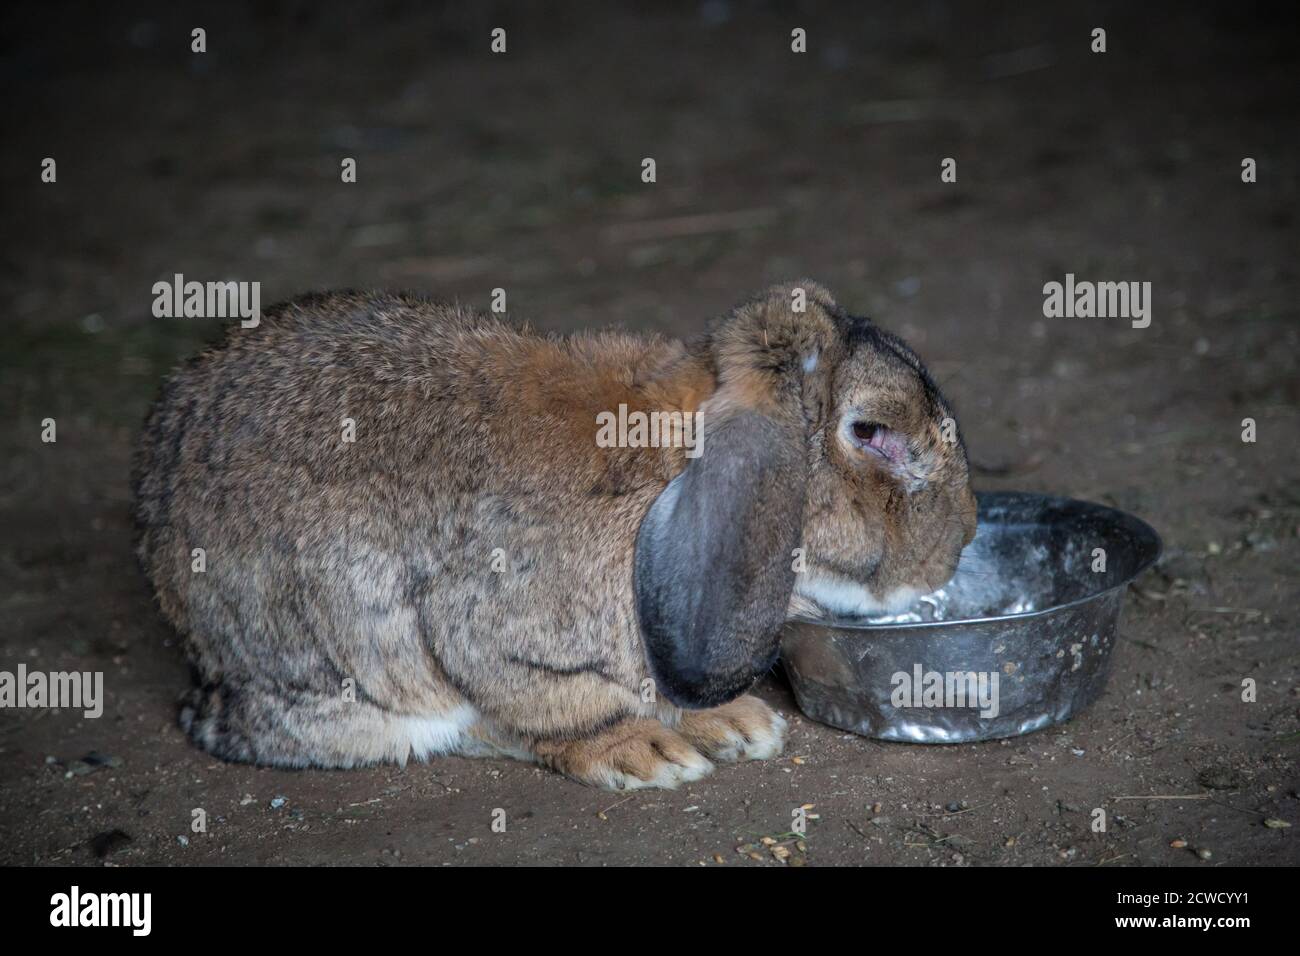 Old brown rabbit with floppy ears eating from a bowl Stock Photo